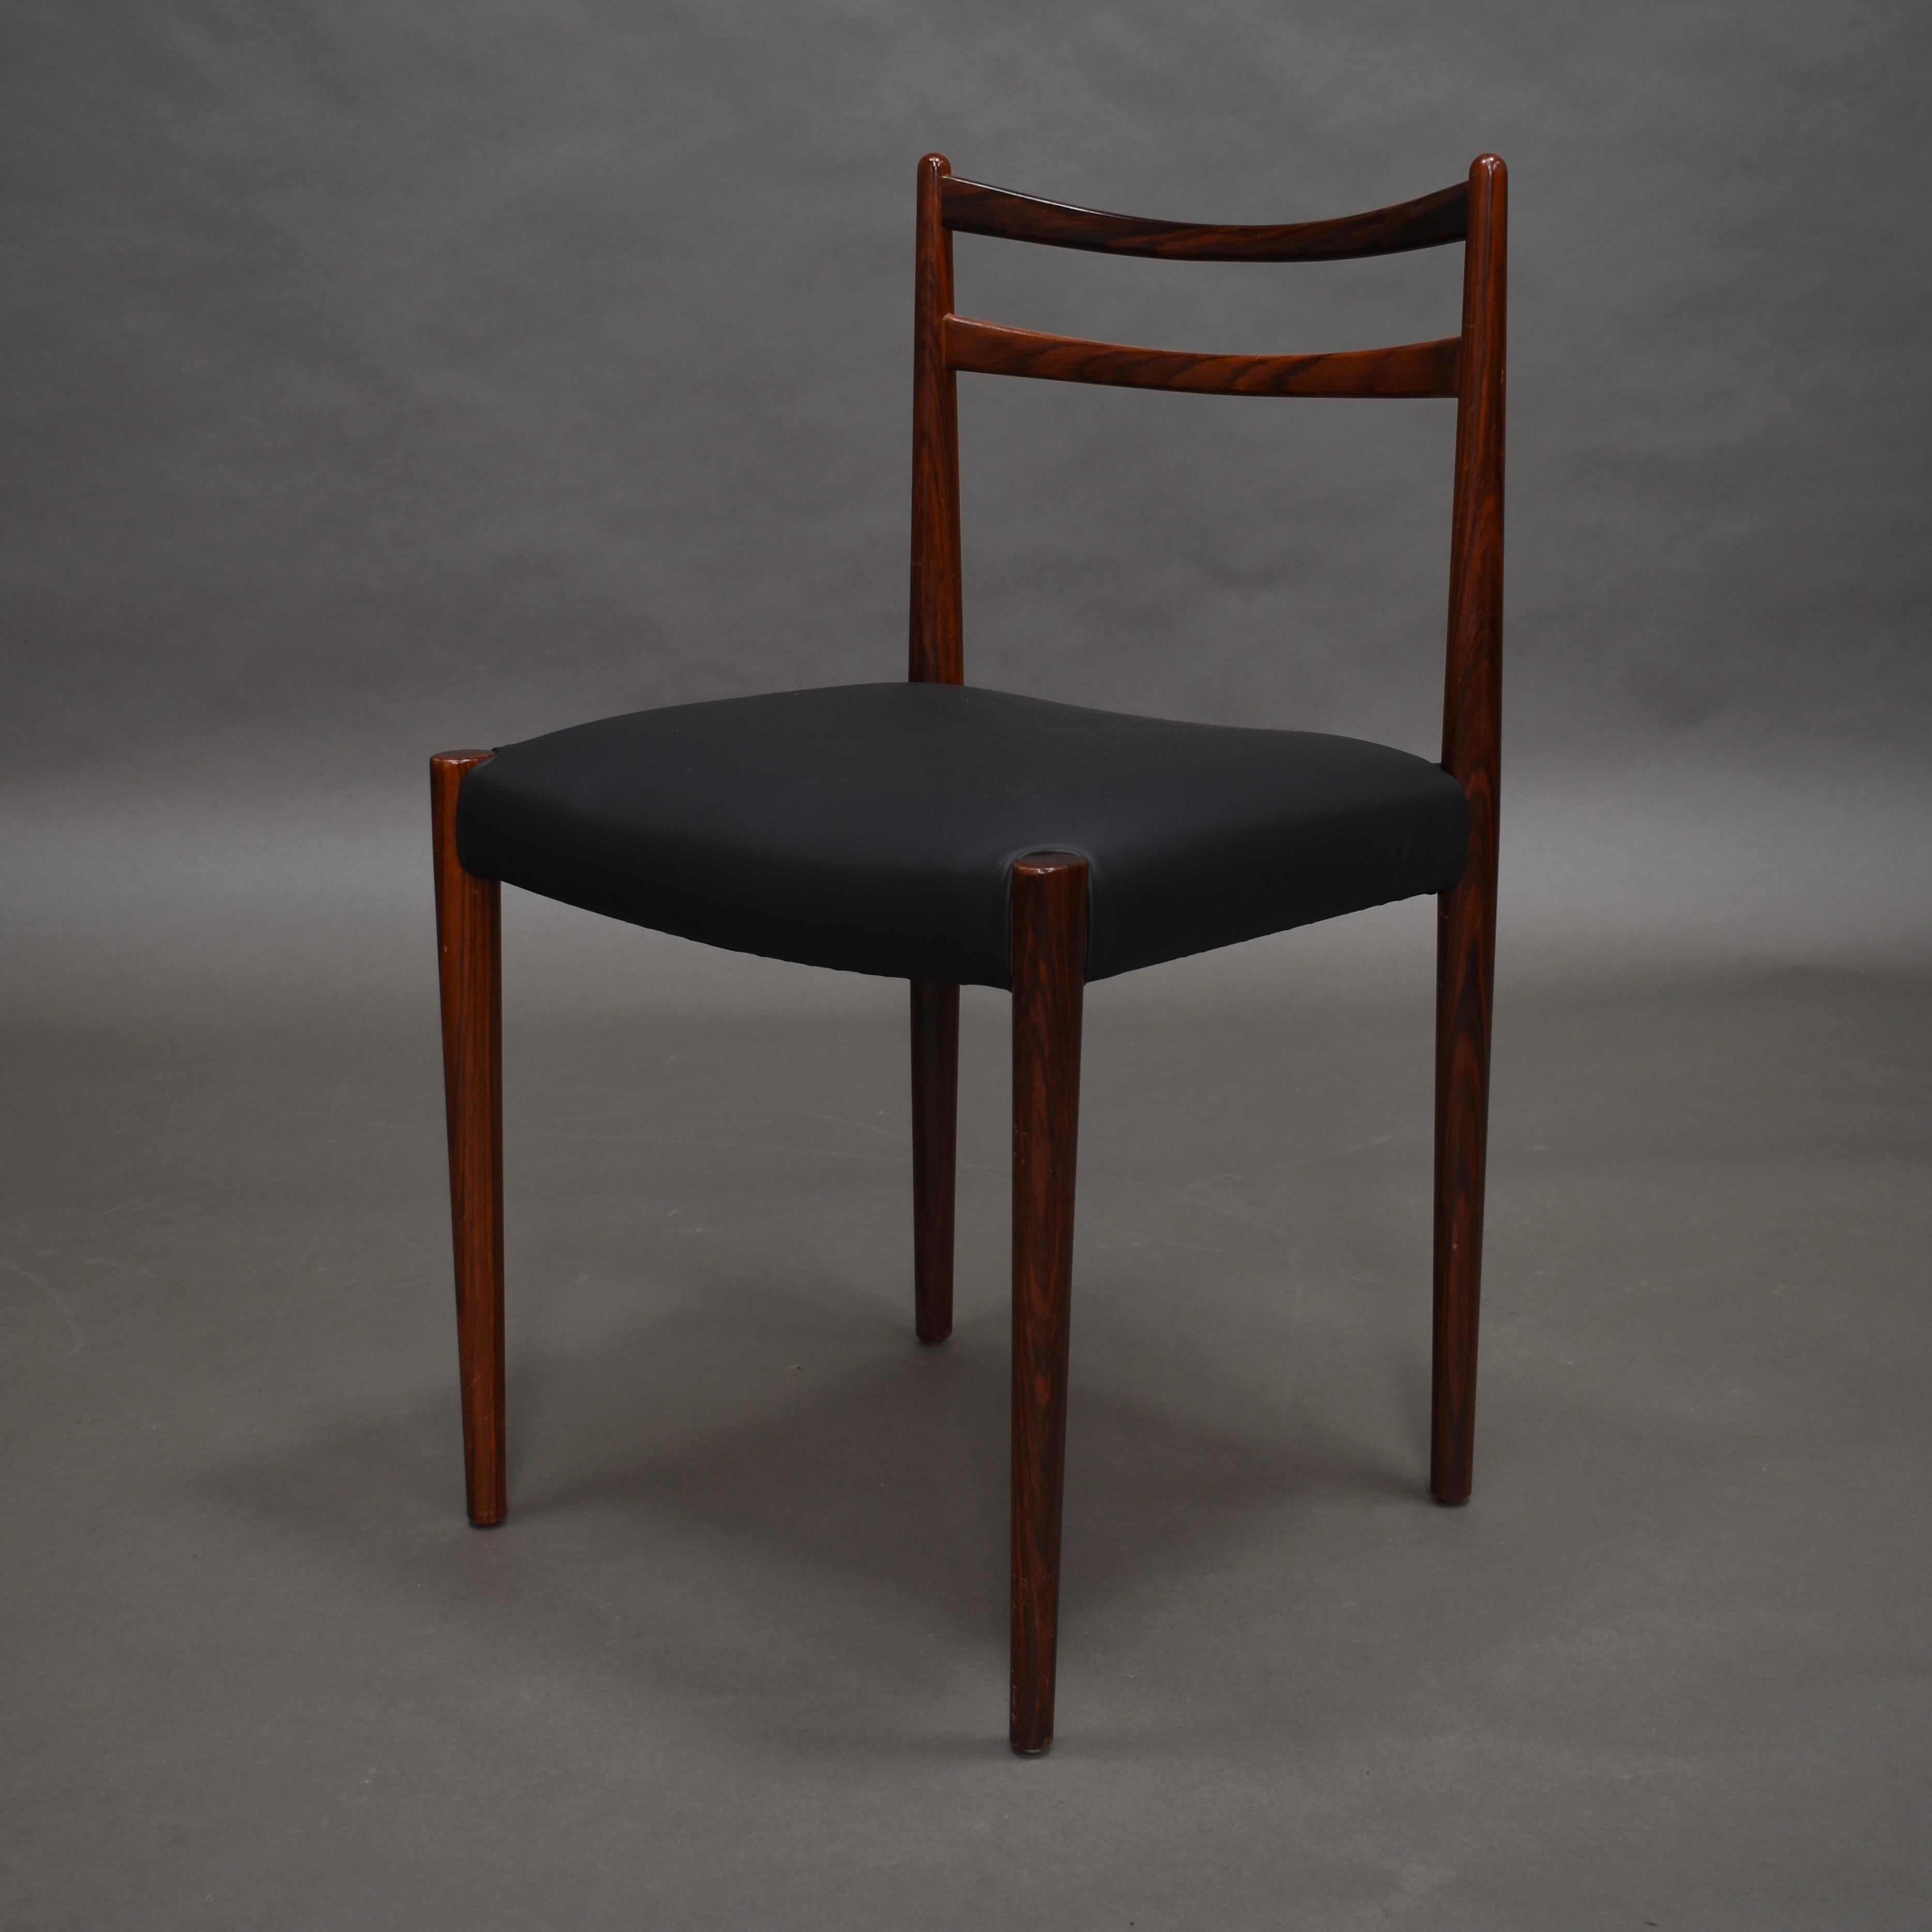 Danish Brazilian Rosewood Dining Chairs in New Black Leather, Denmark, 1950s 2